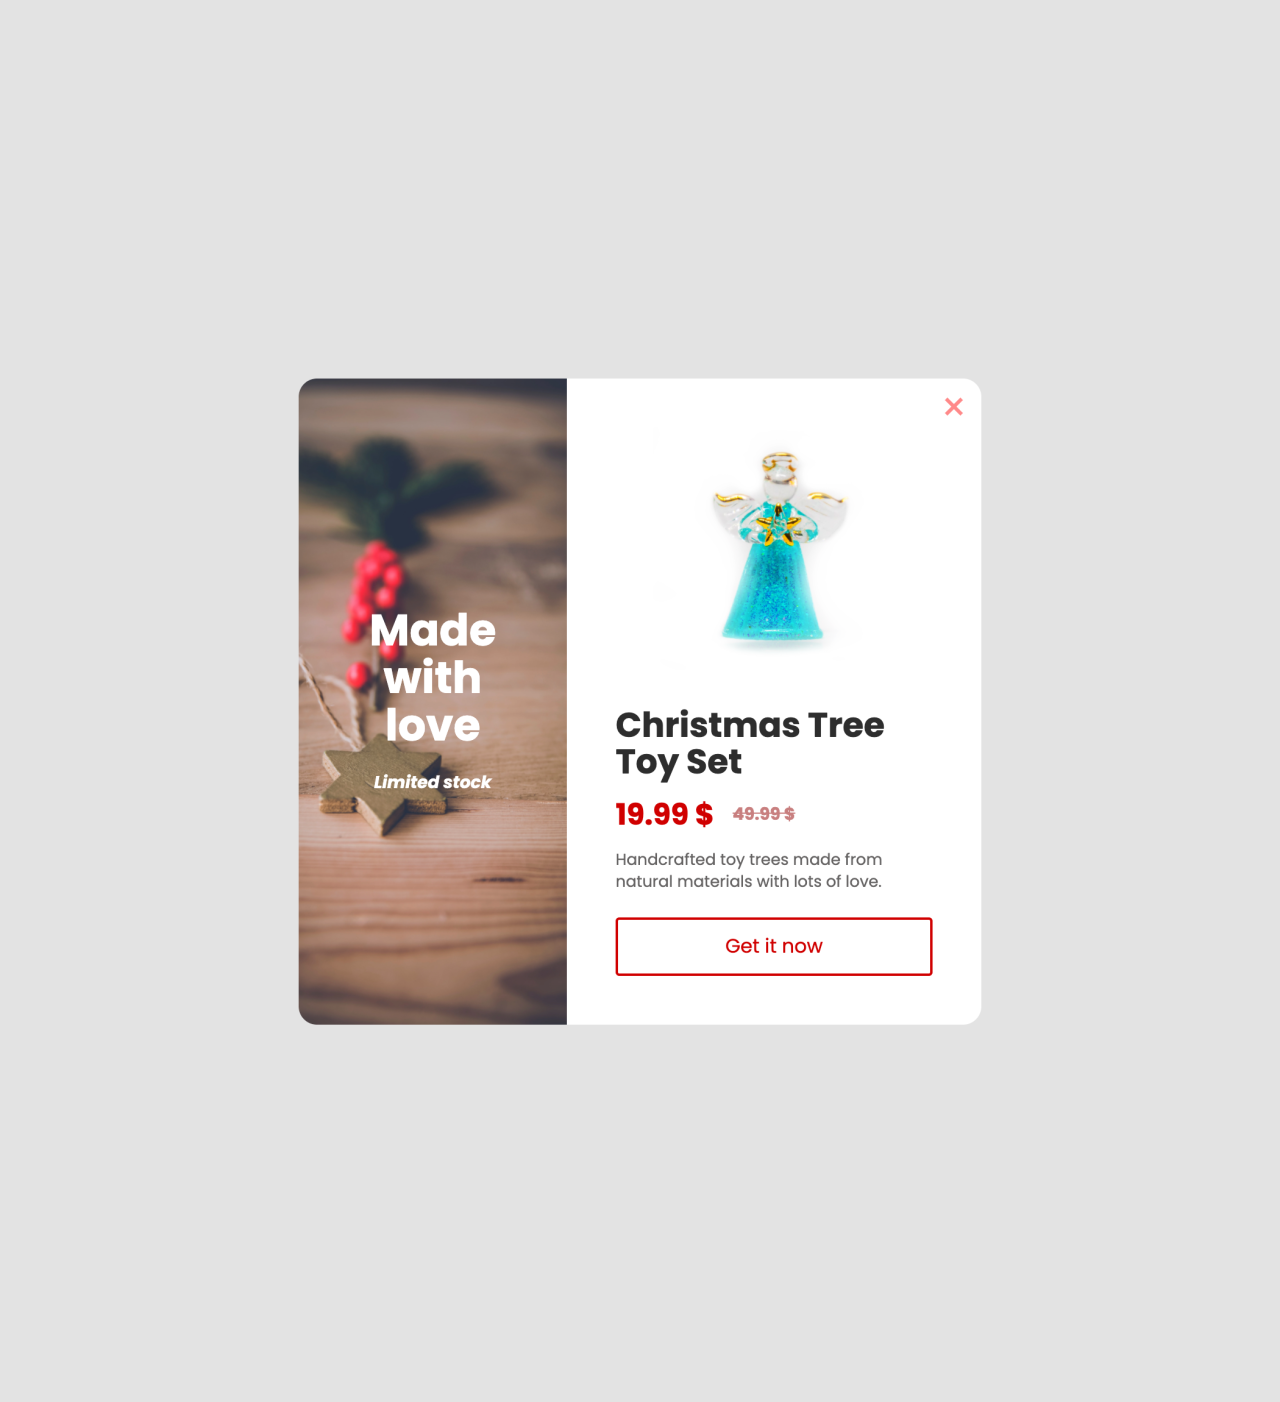 Festive product promotion template - Made by MailerLite